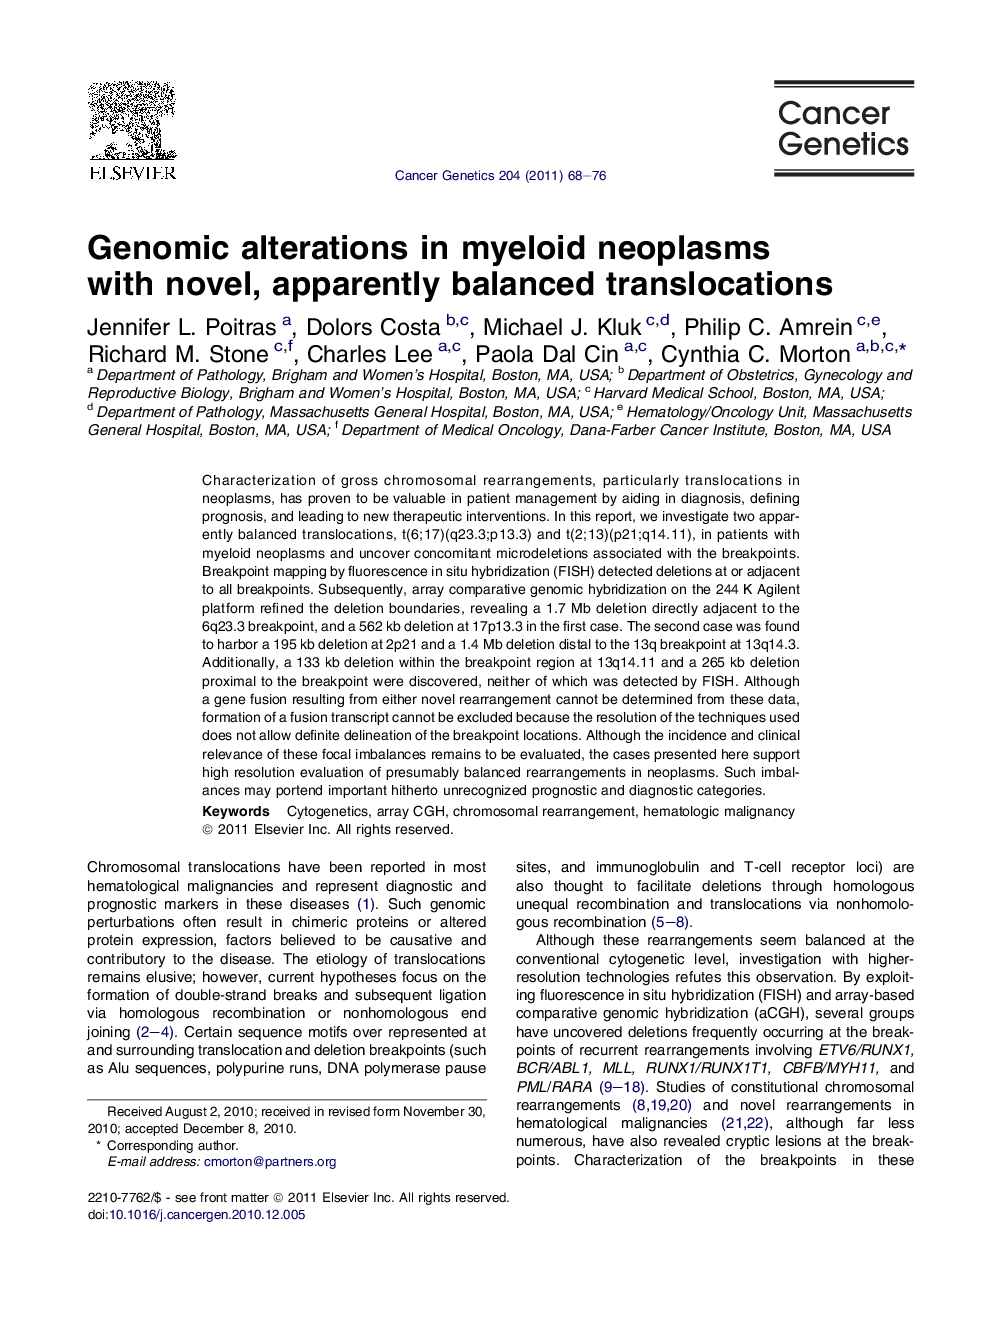 Genomic alterations in myeloid neoplasms withÂ novel, apparently balanced translocations